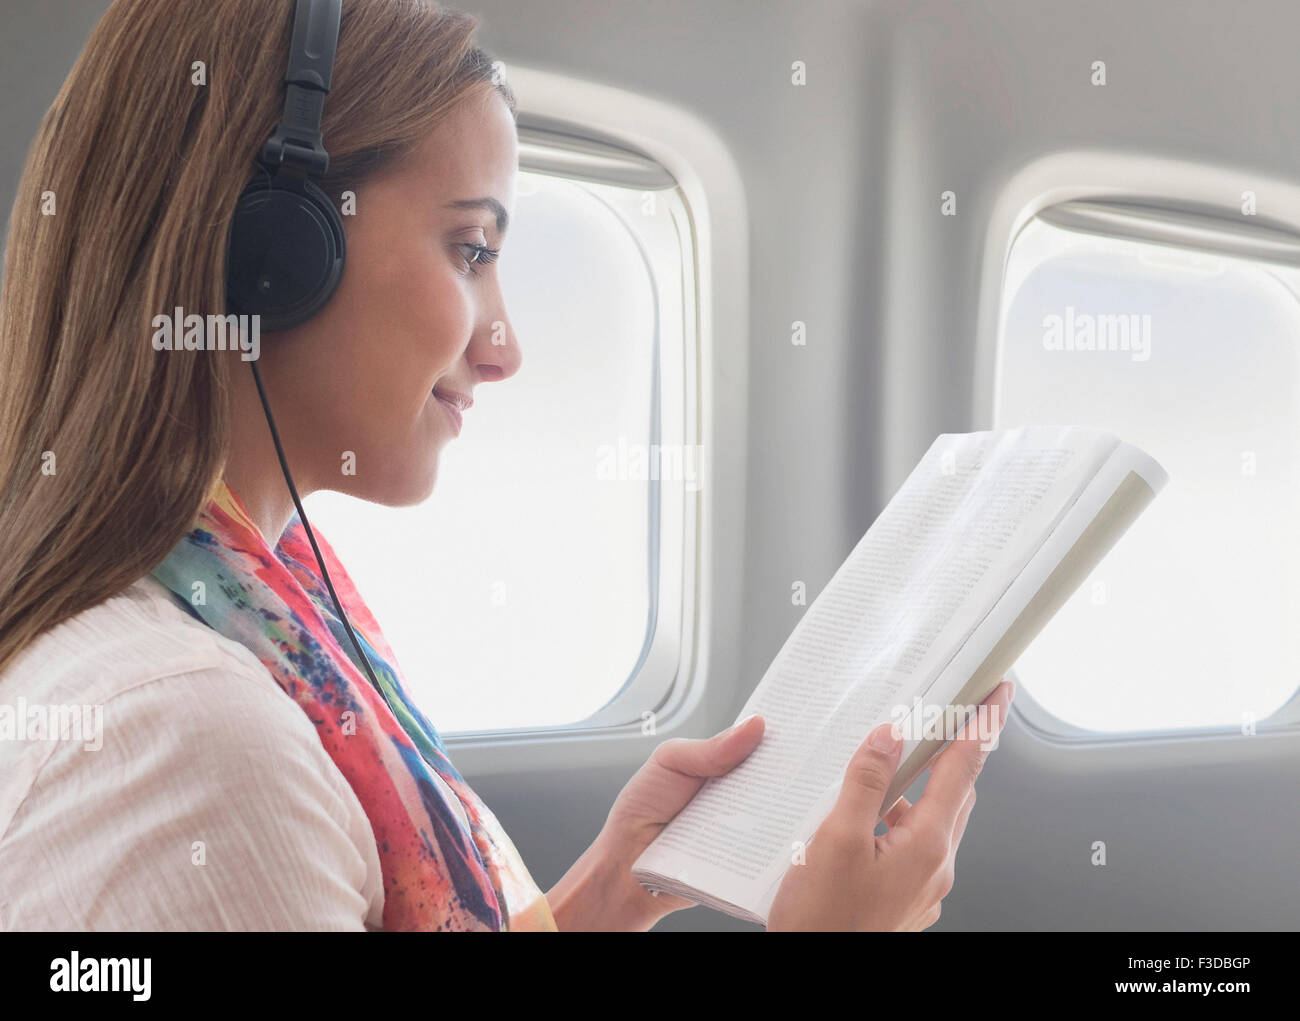 Young woman wearing headphones while reading book on plane Stock Photo